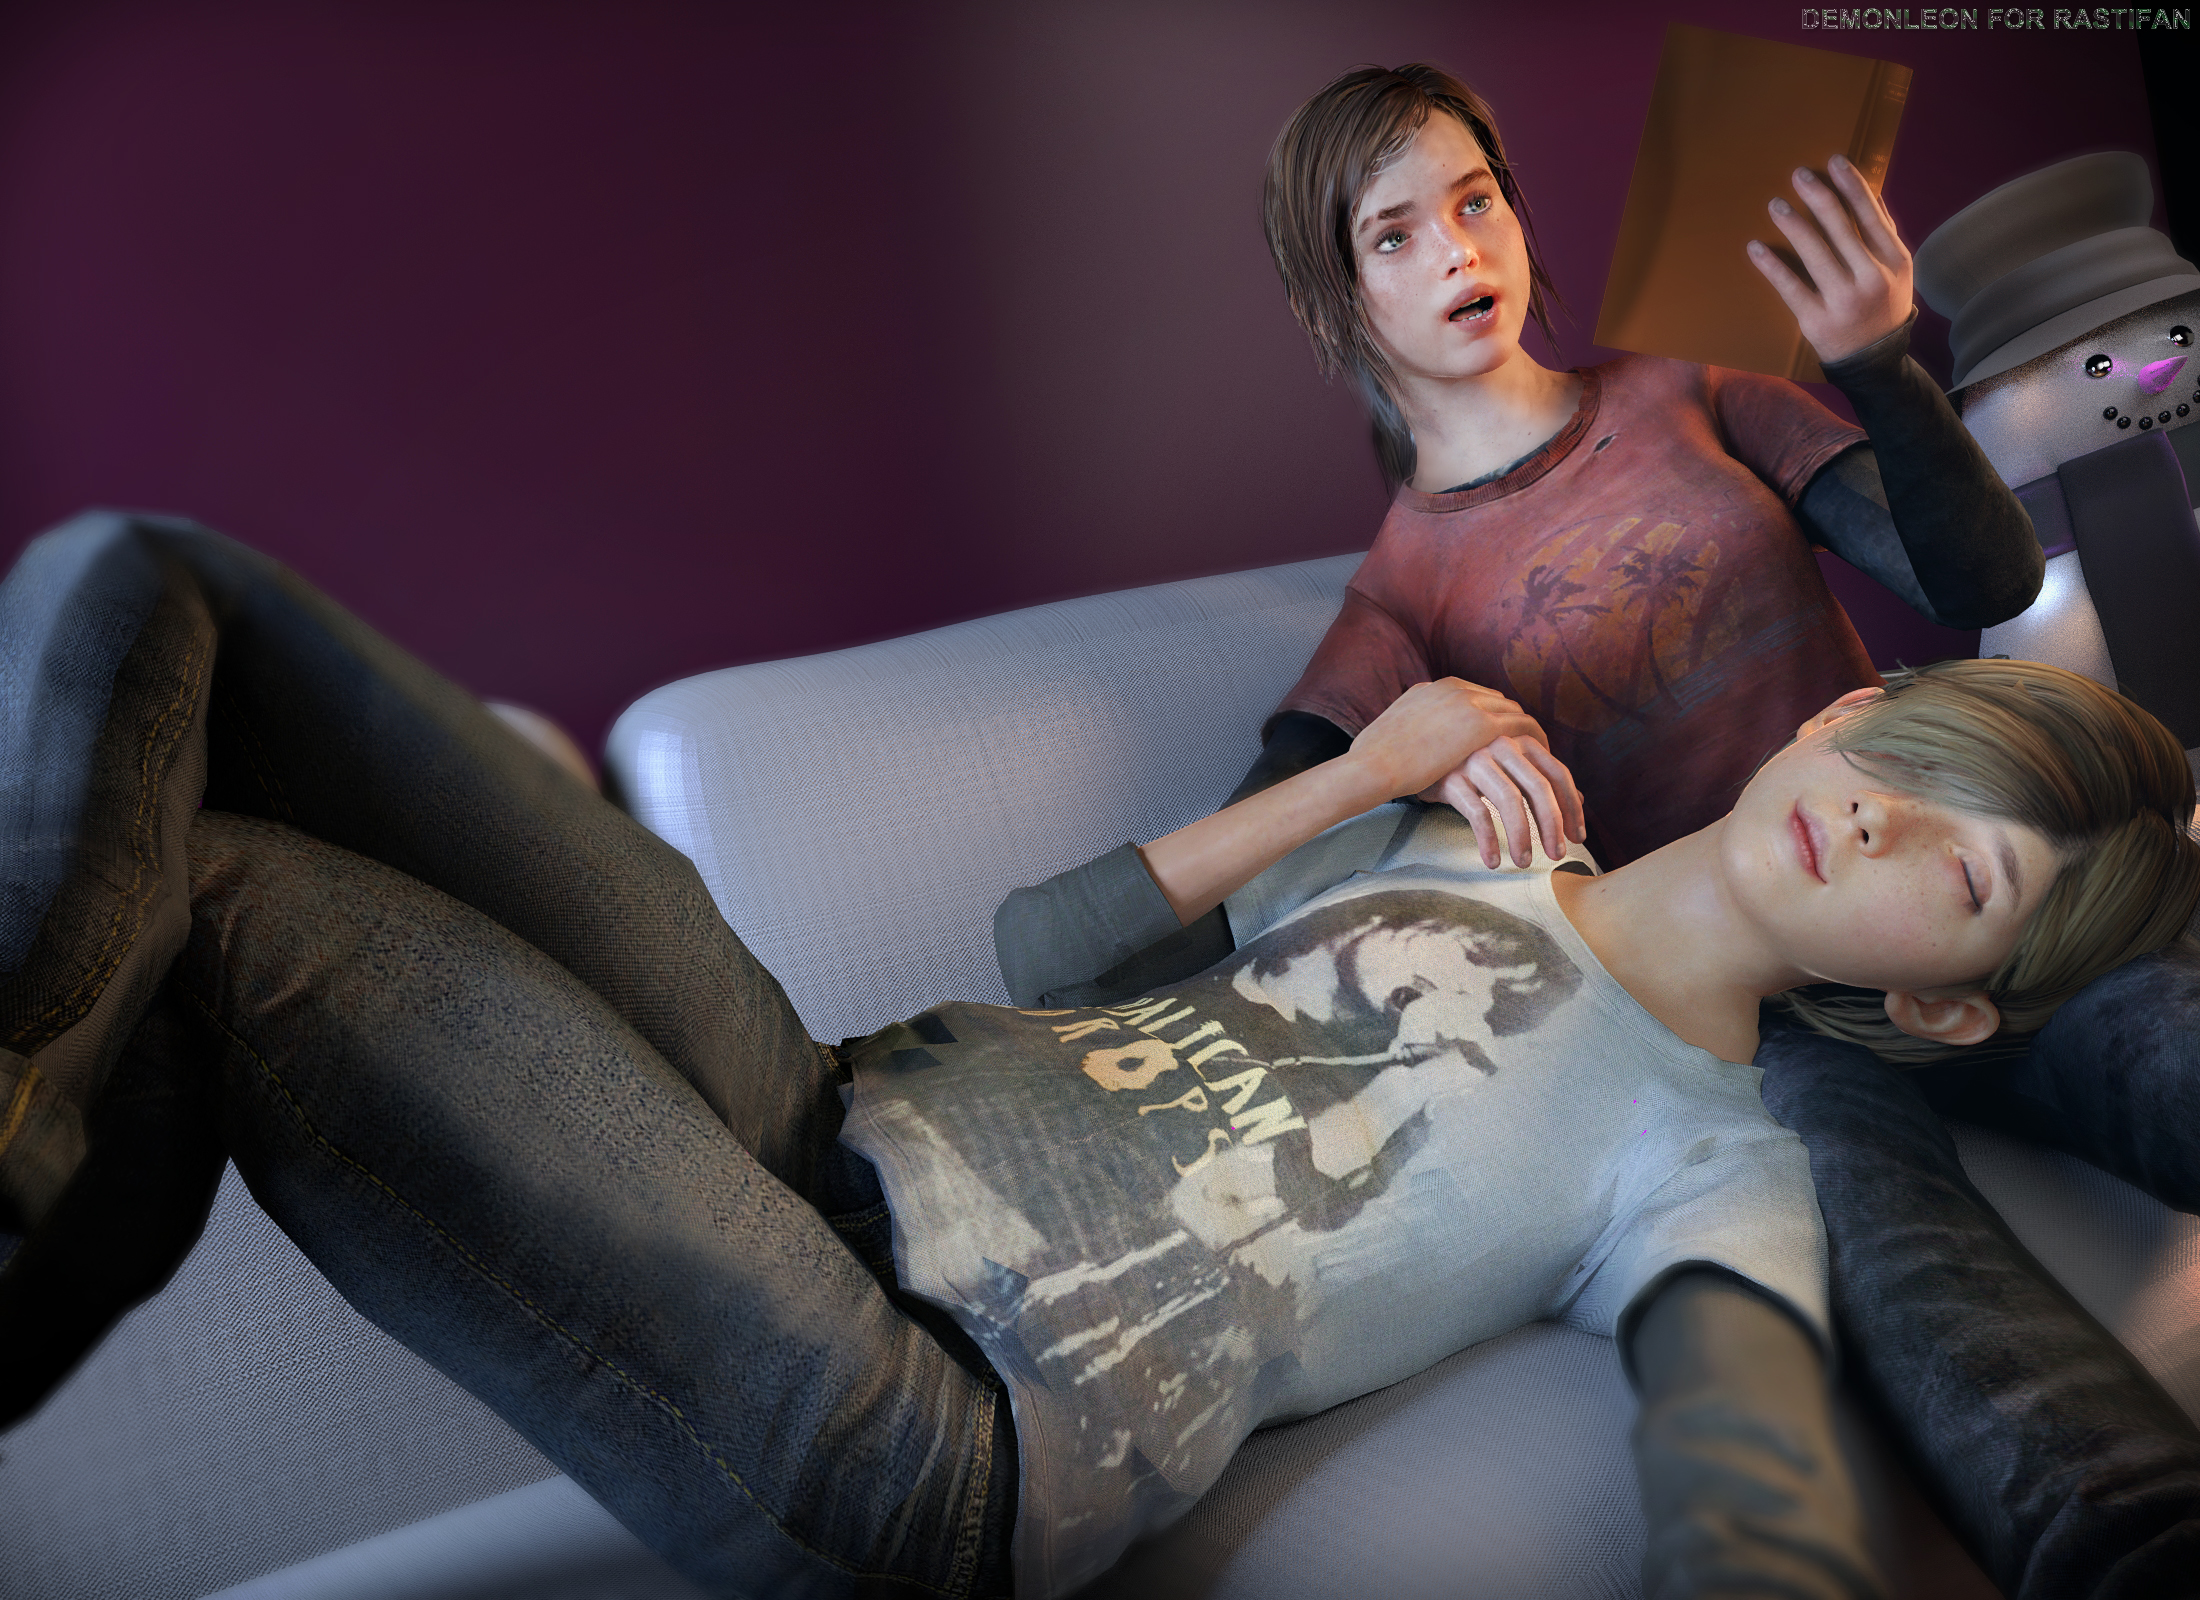 Sarah - by DemonLeon3D  The last of us, The last of us2, Edge of the  universe